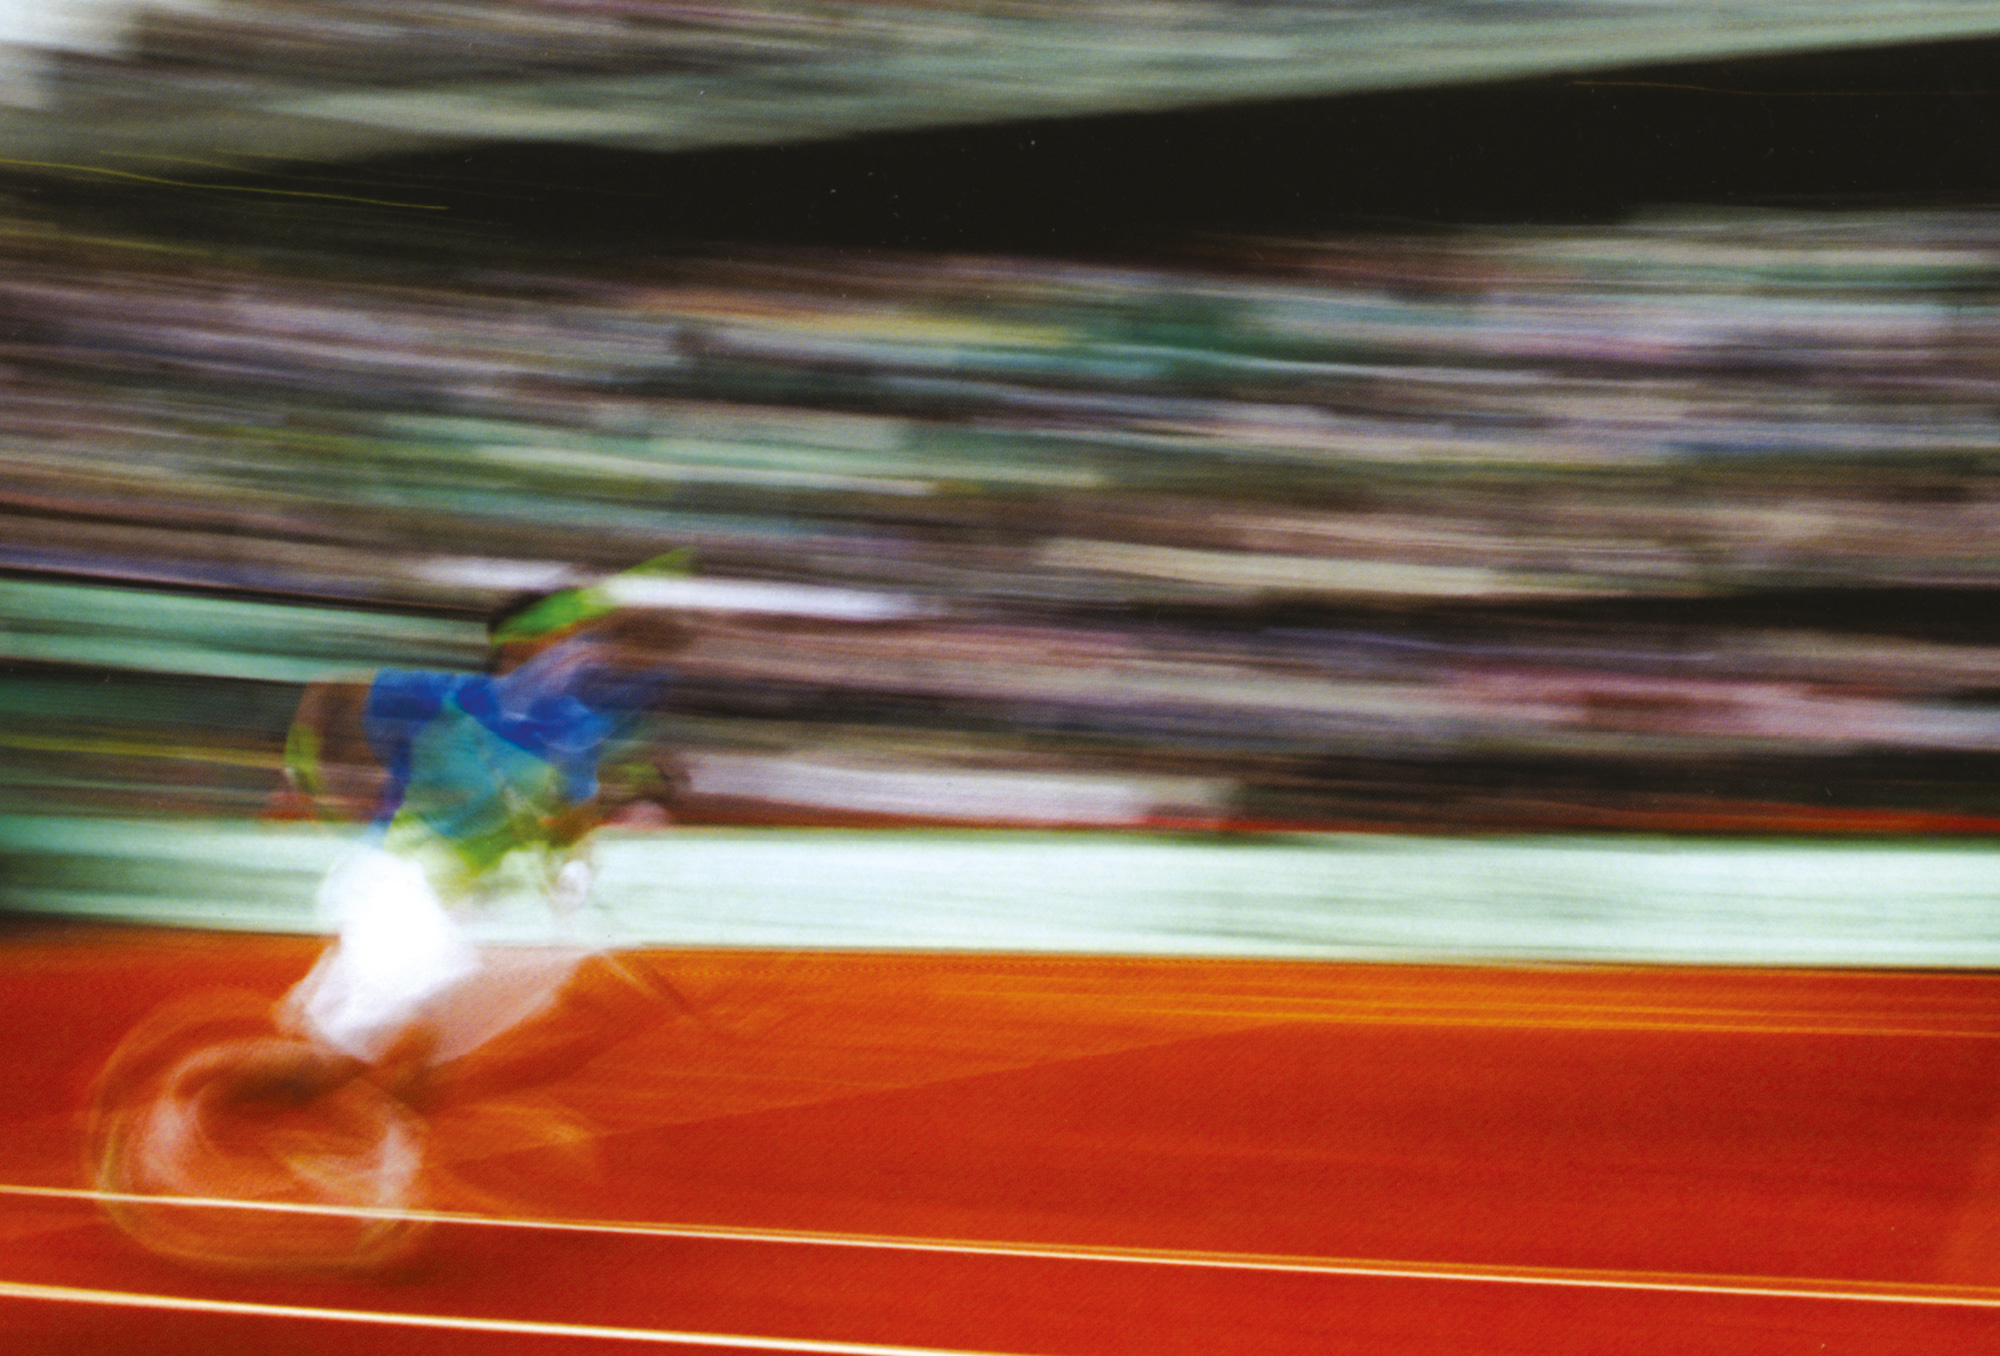 A blurred photograph of Nadal running for a ball.